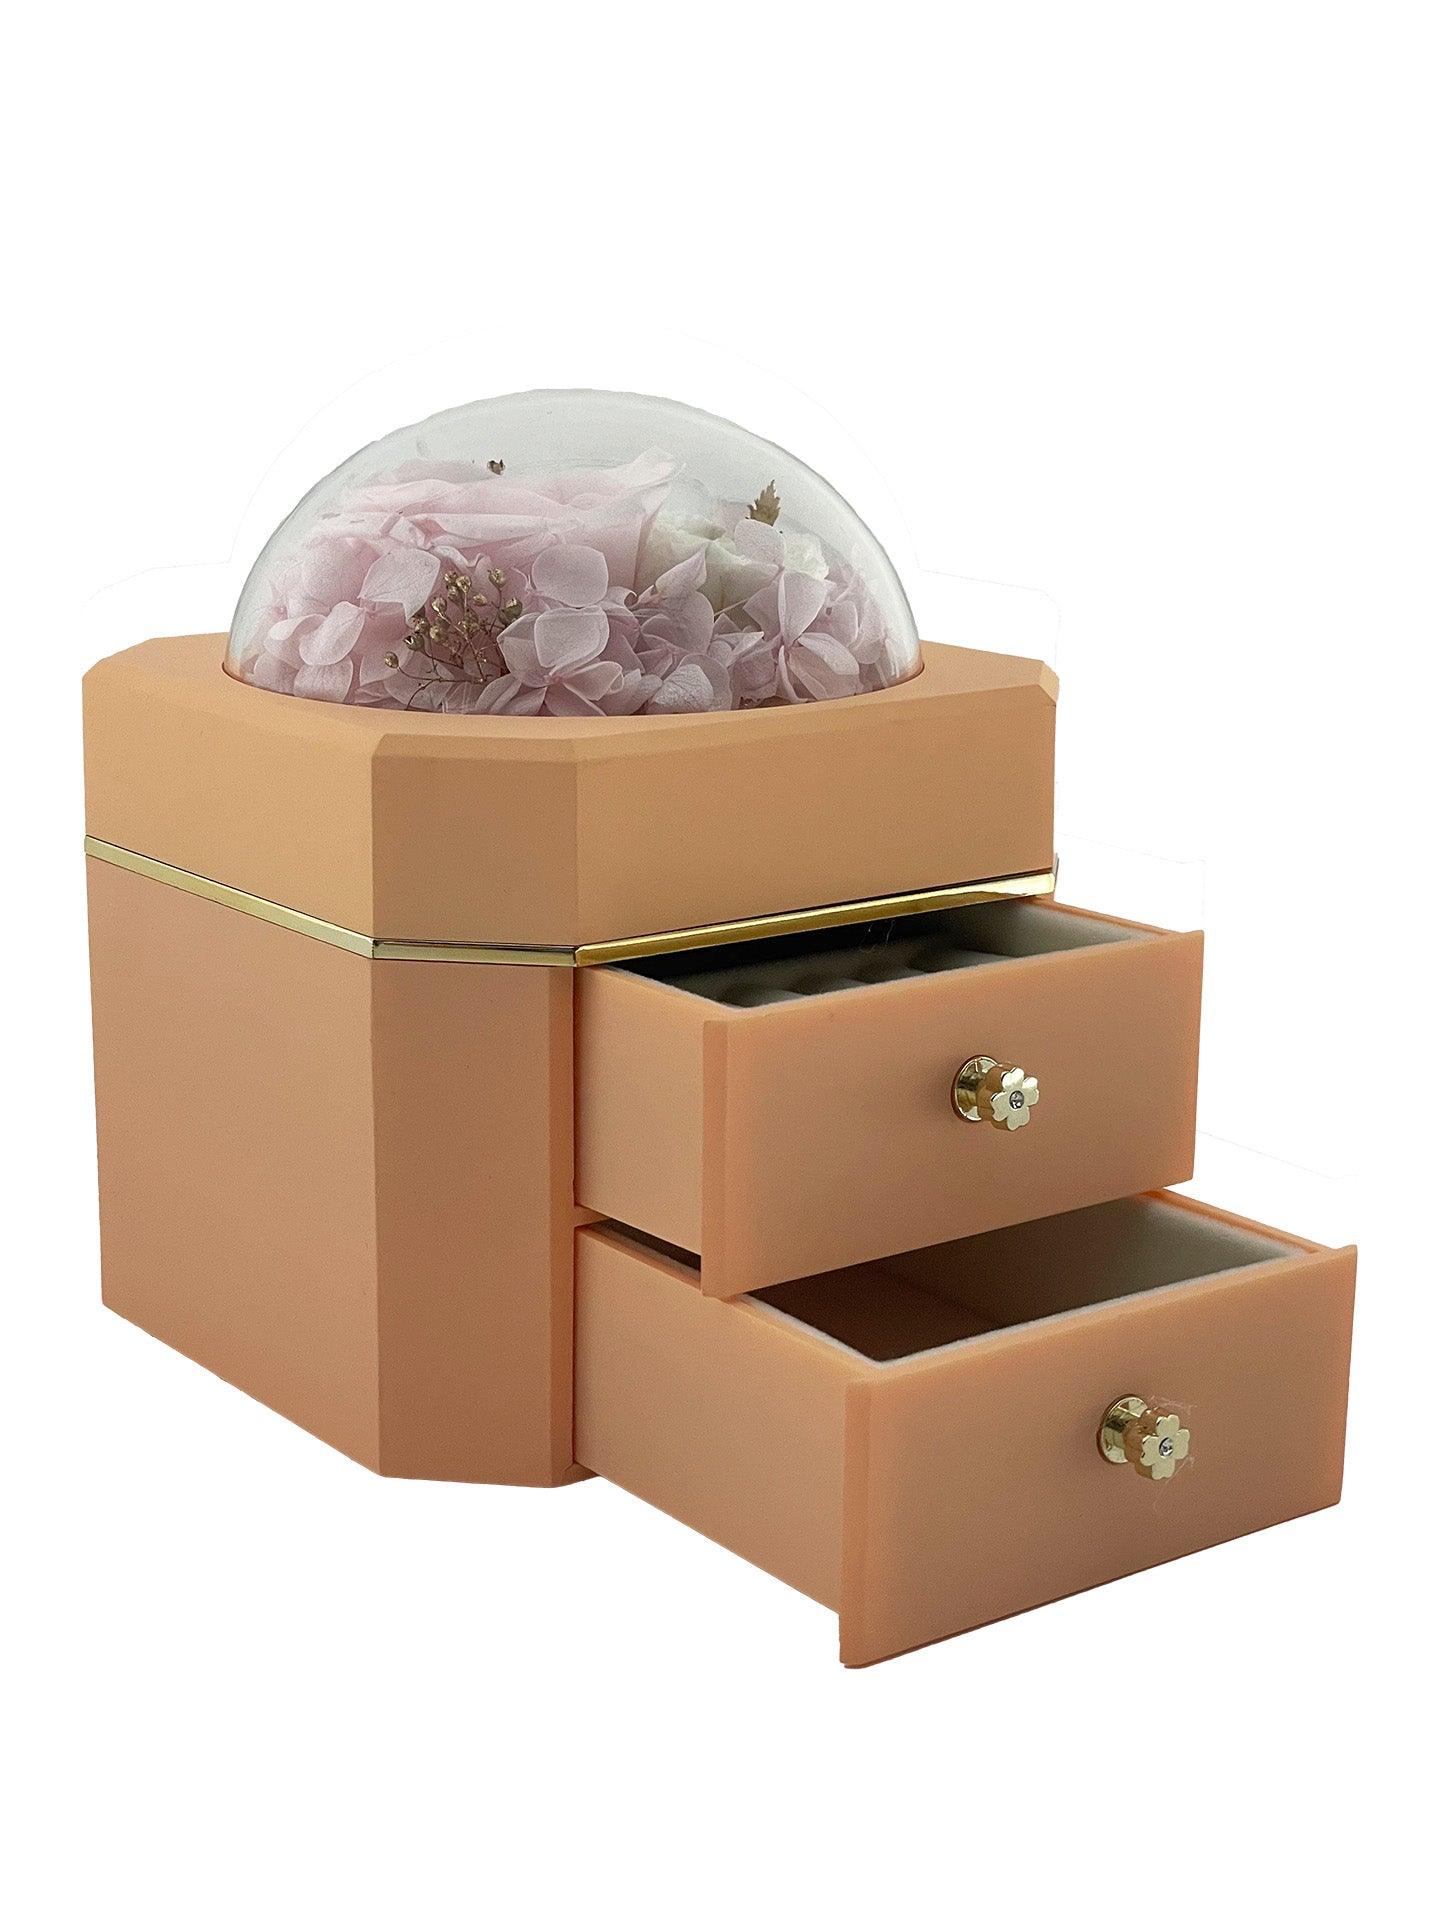 The beautiful duo-drawer jewellery box with a pinkish-tan finish complements the elegance of this preserved flower arrangement. It features a stunning pink rose, two delicate white flowers, and pink hydrangea petals. Same-day delivery is available in Melbourne, VIC, Australia.